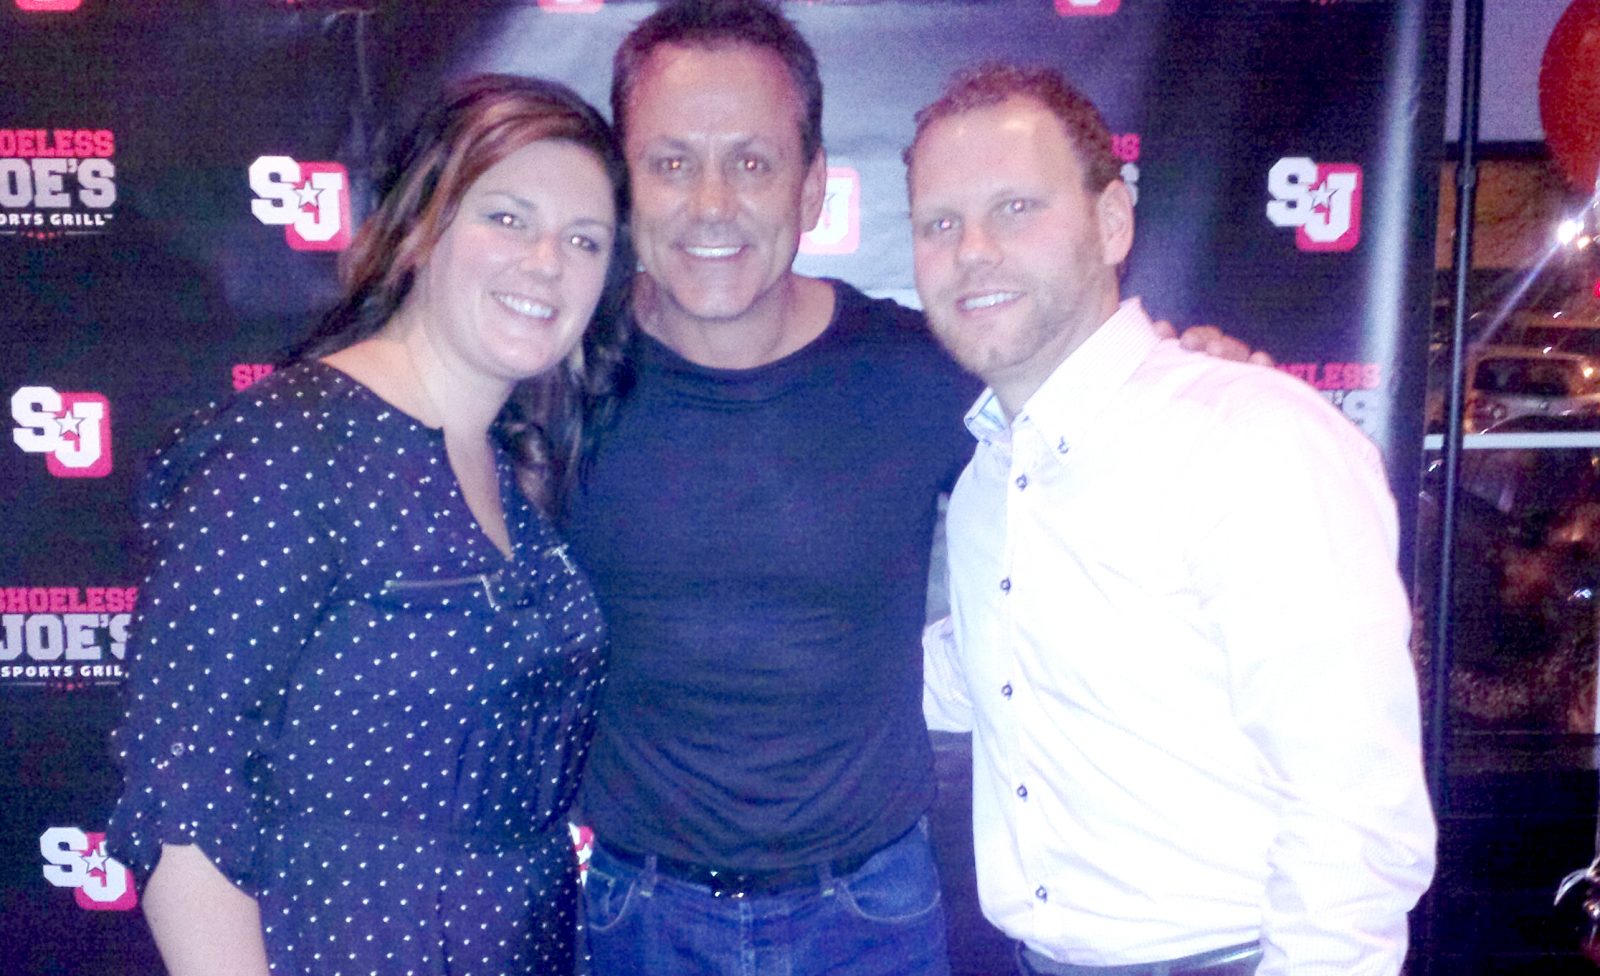 Doug Gilmour in Cornwall next week as part of $10k presentation to city